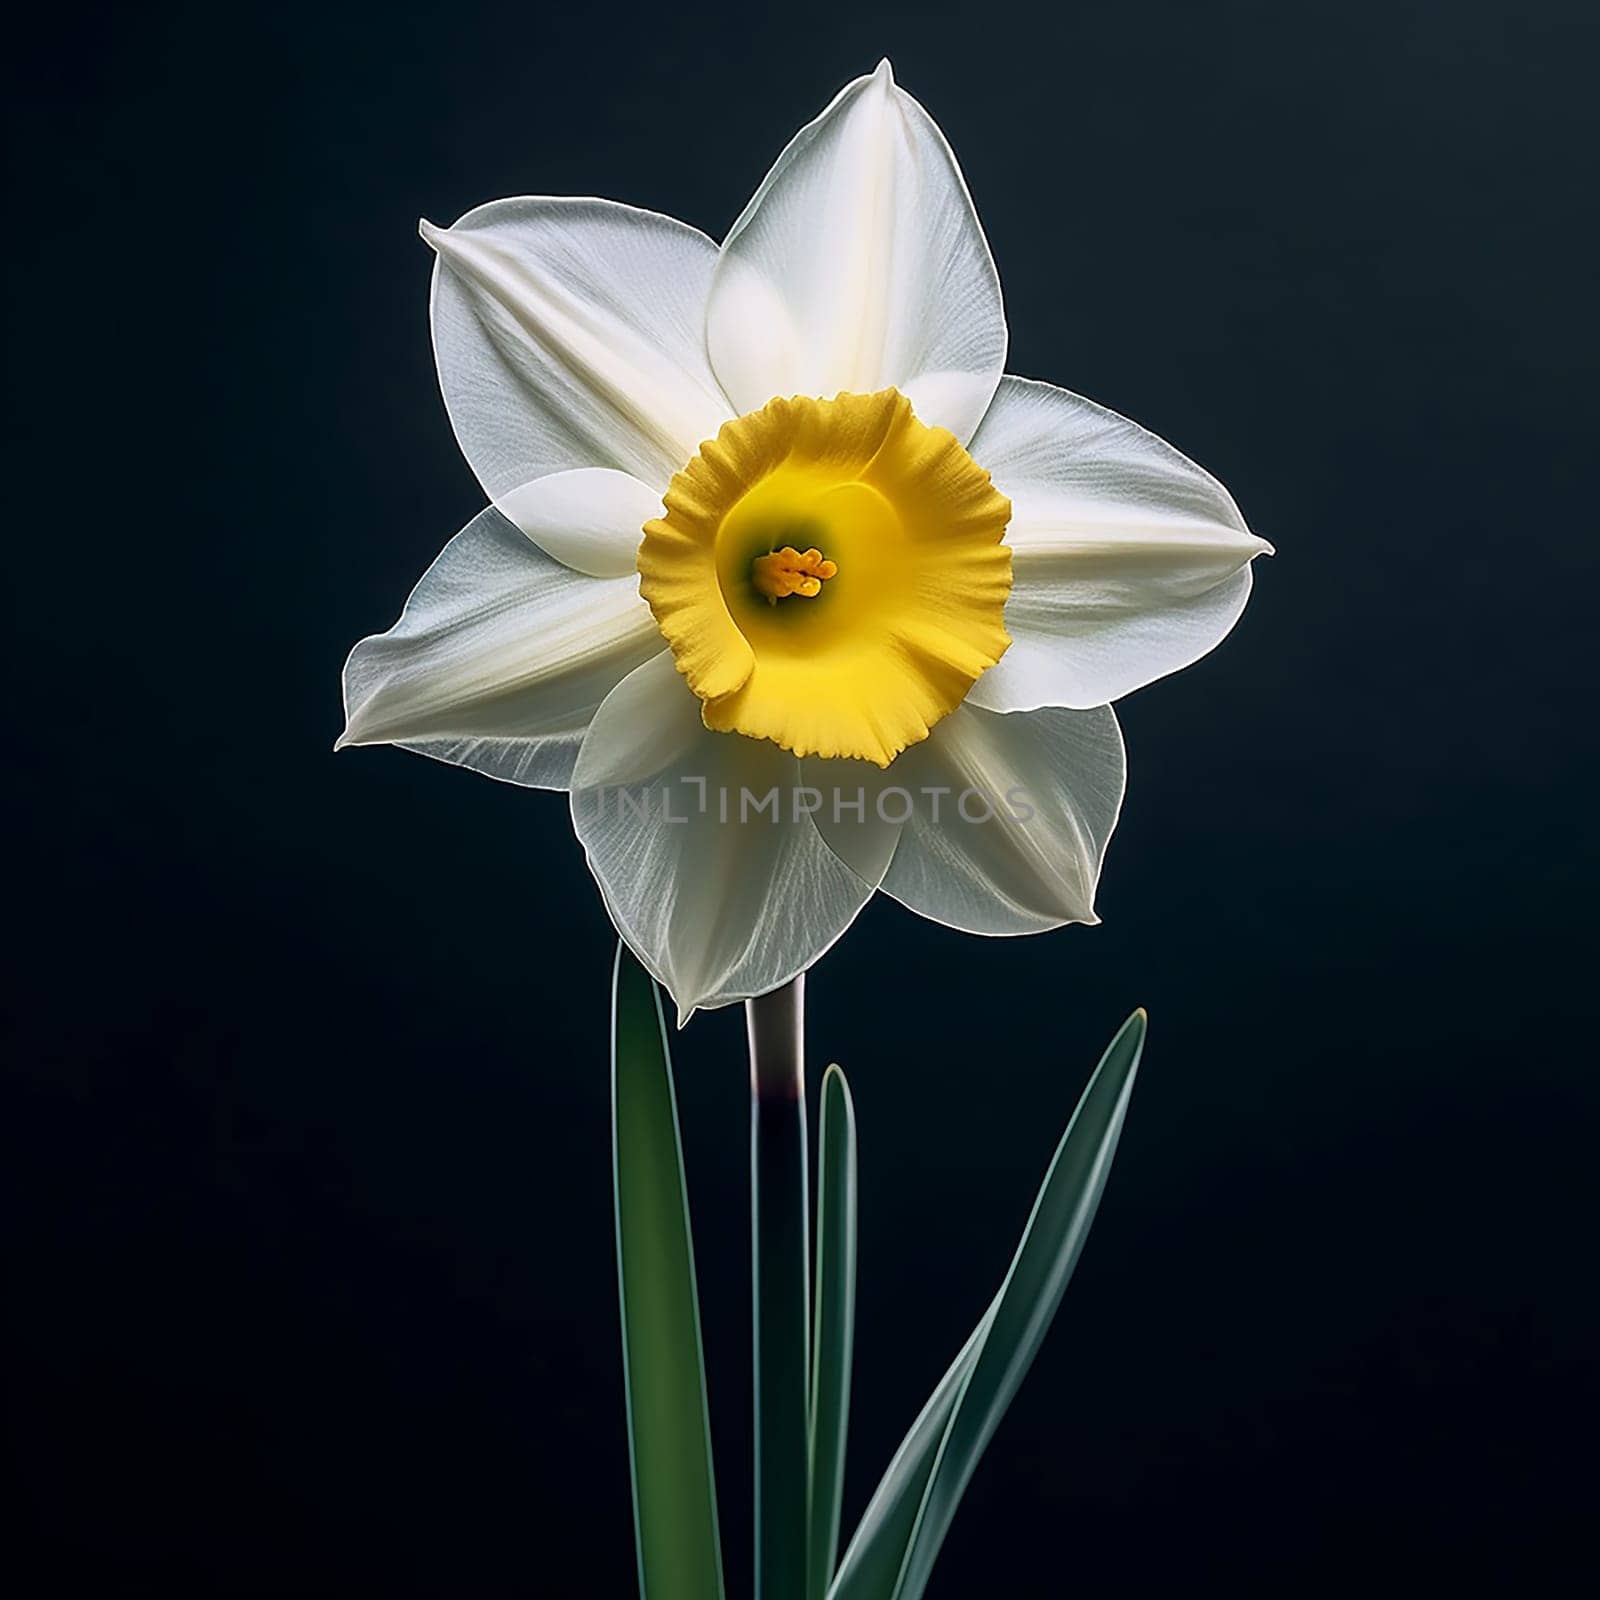 Close-up of a white and yellow daffodil against a dark background